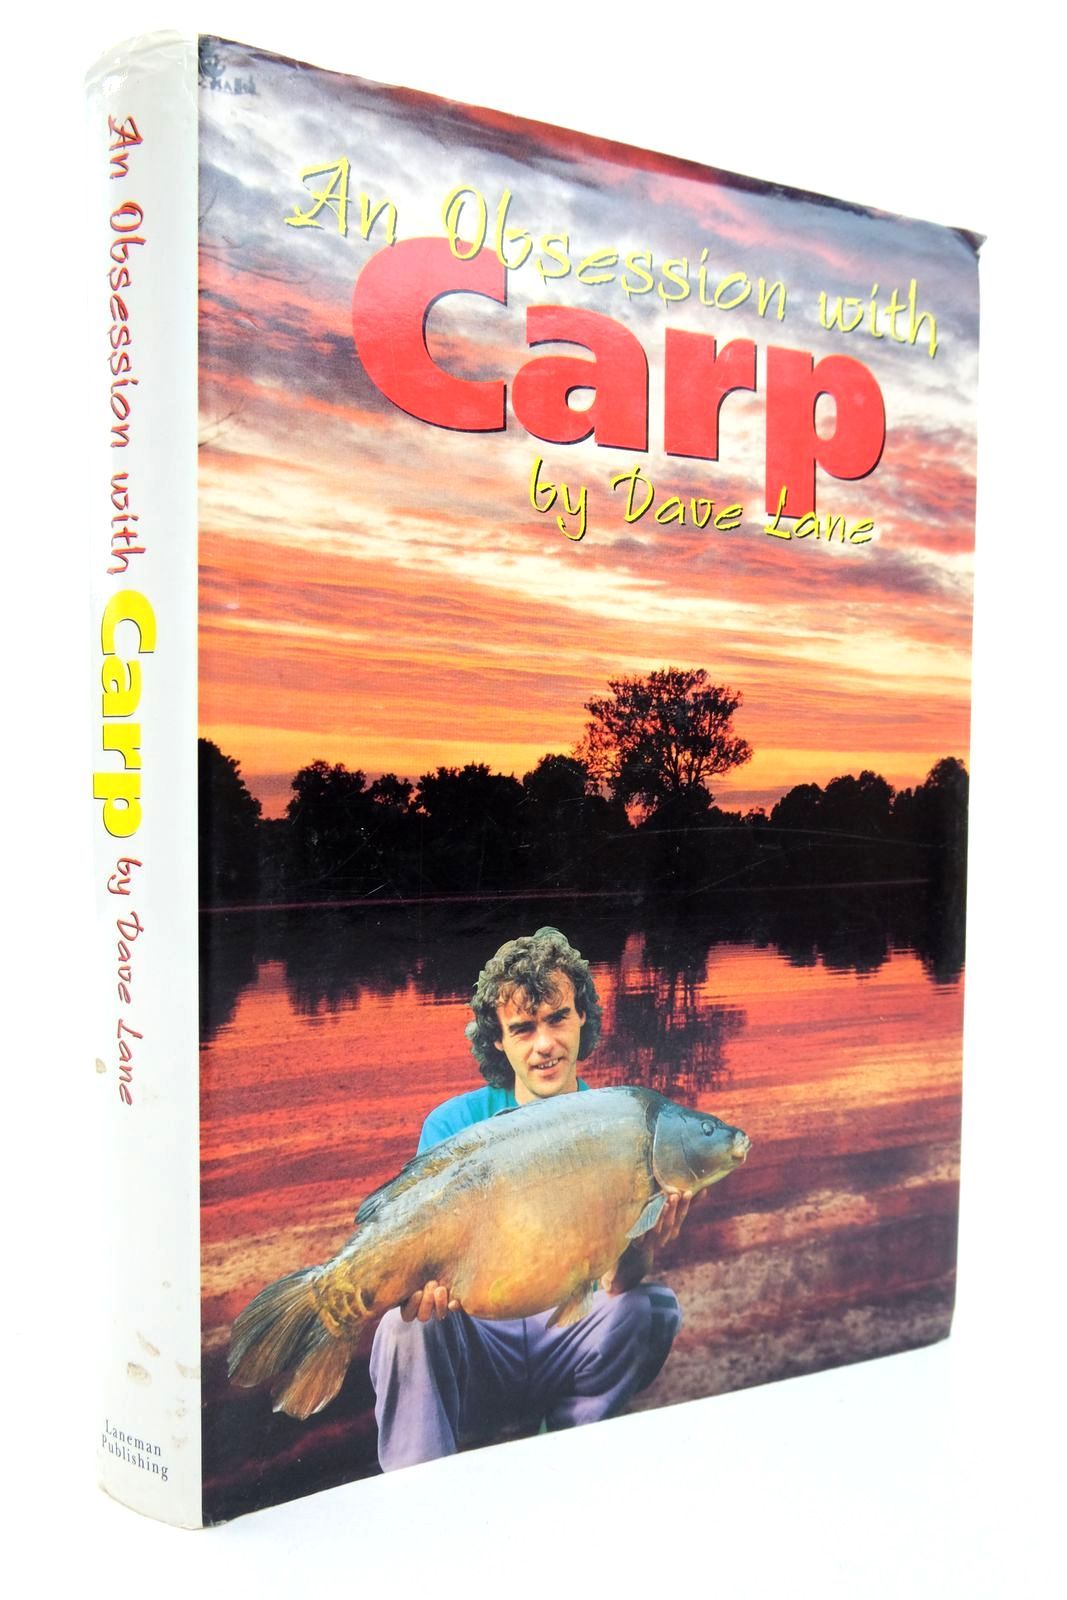 Photo of AN OBSESSION WITH CARP written by Lane, Dave published by Laneman Publishing (STOCK CODE: 2139606)  for sale by Stella & Rose's Books